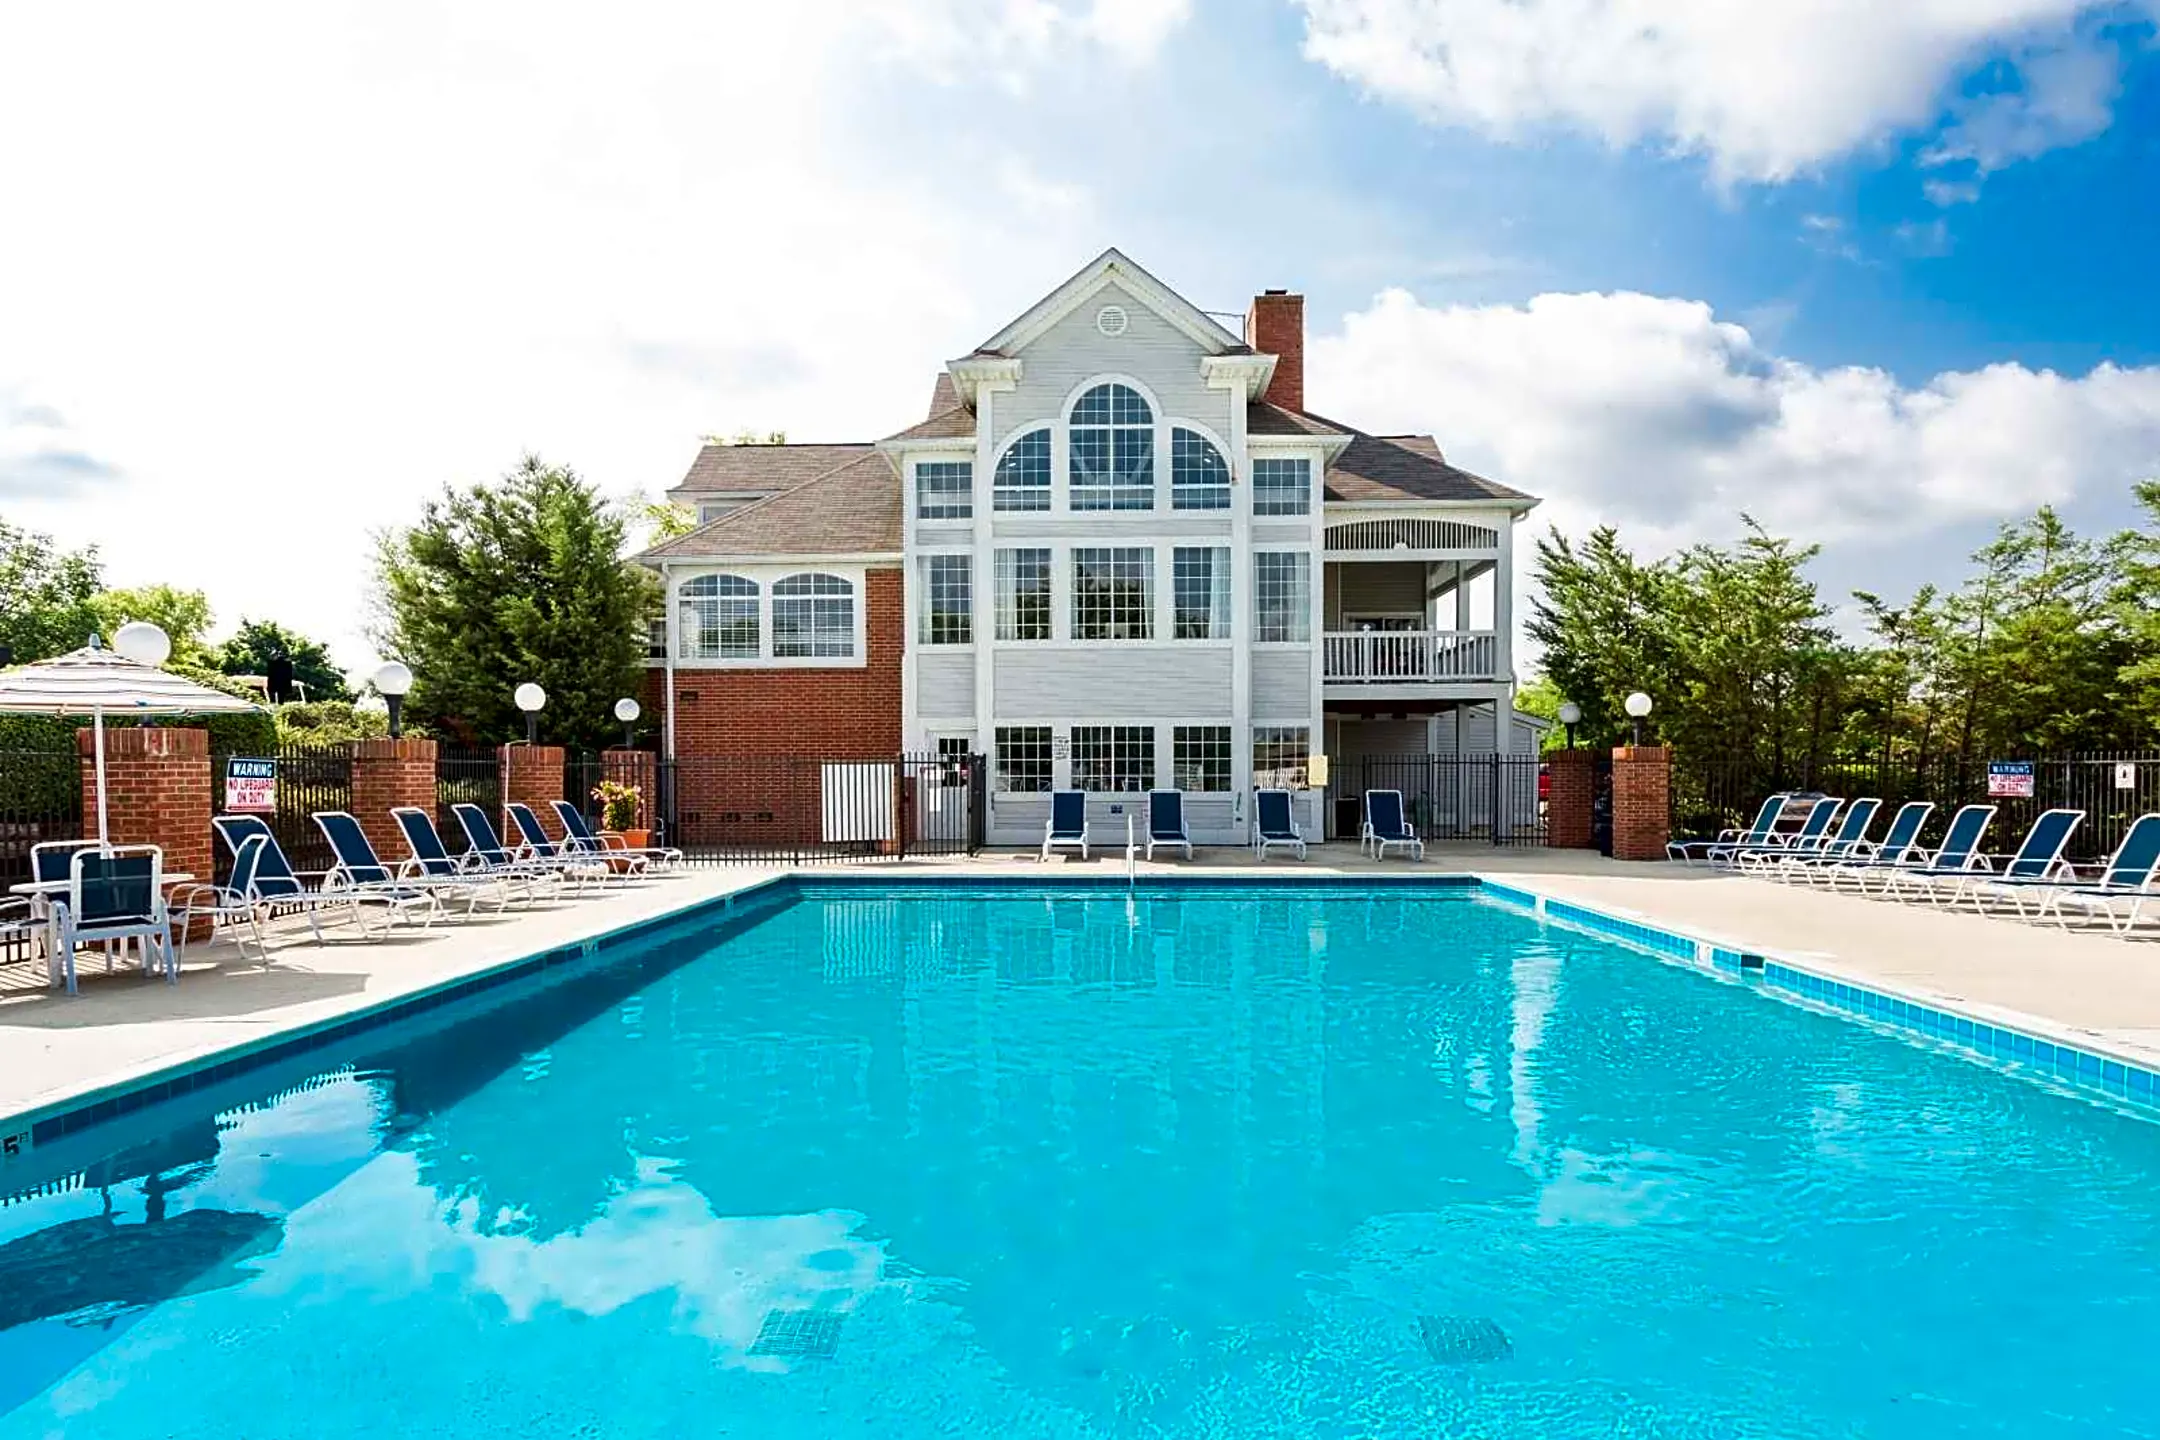 Pool - Sundance Apartments - Indianapolis, IN